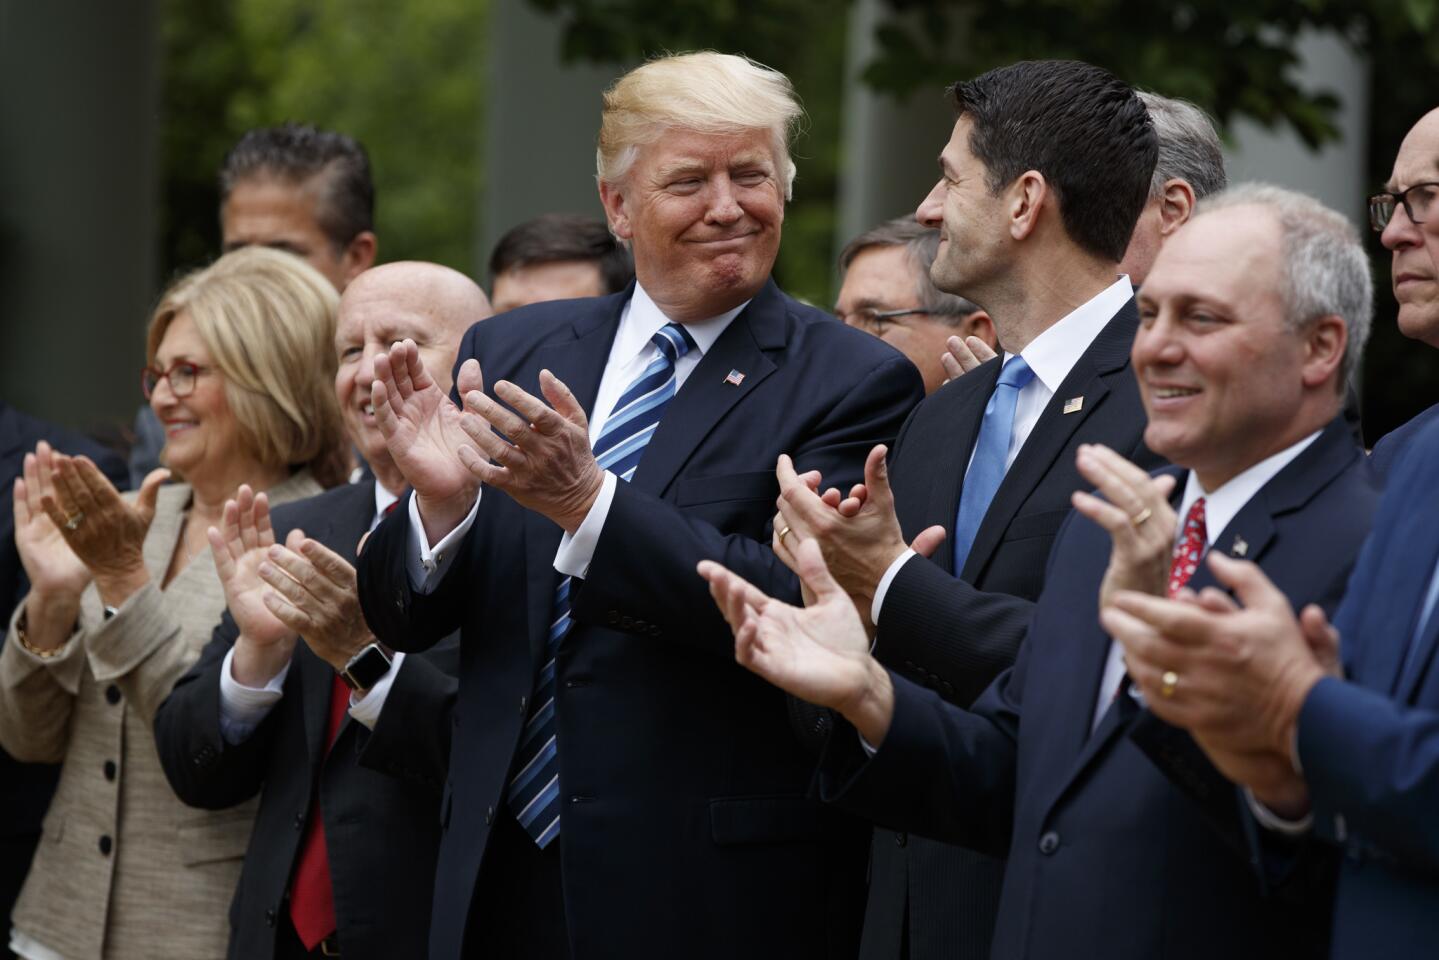 President Donald Trump smiles at Rep. Paul Ryan, R-Wis., in the Rose Garden of the White House after the House pushed through a health care bill on May 4, 2017, in Washington.